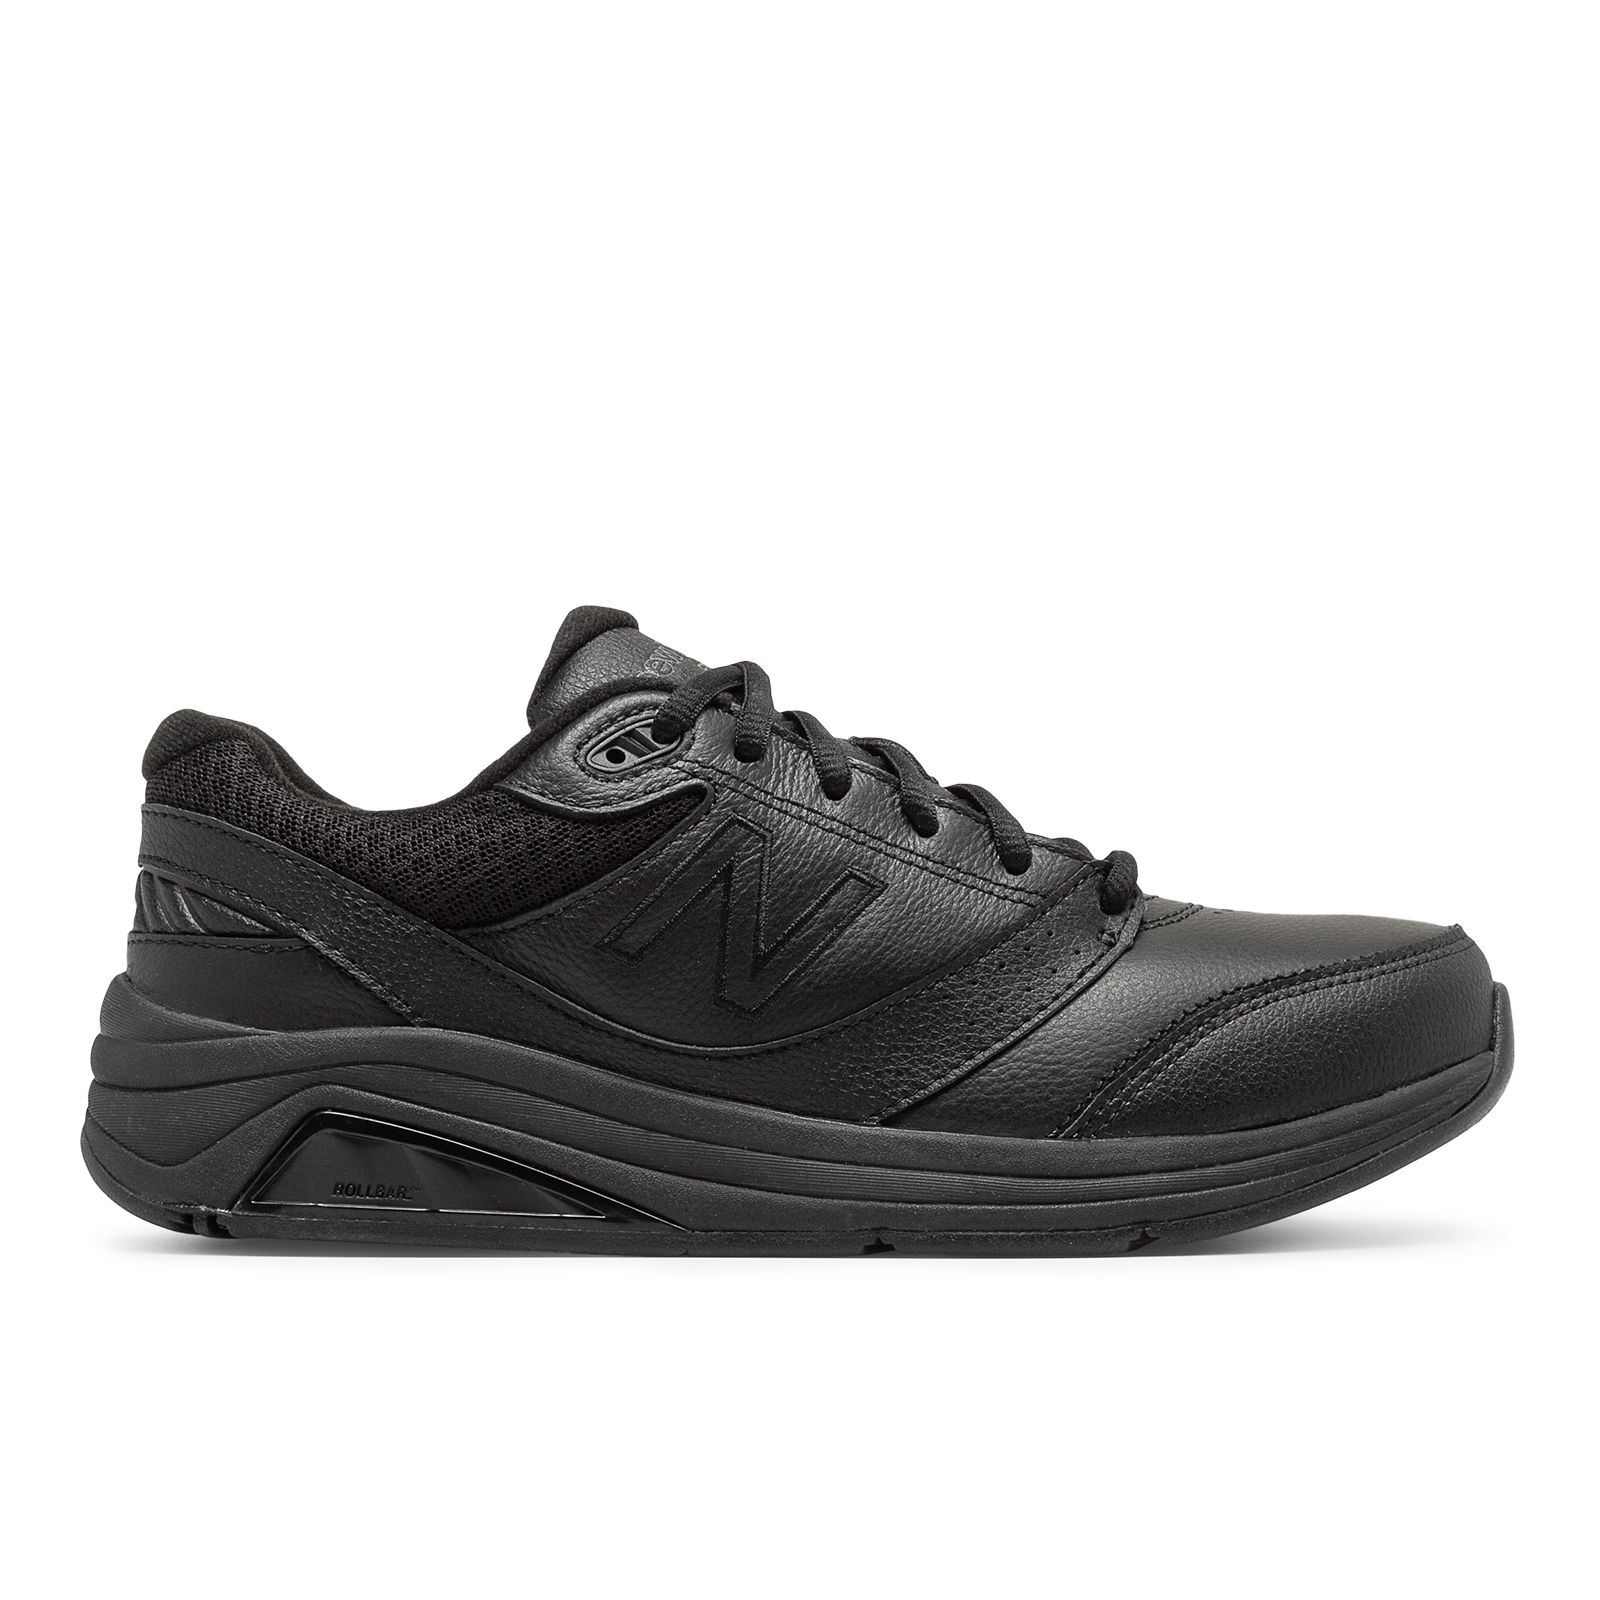 New Balance Walking Shoes With Rollbar Technology And A Wide Base ...